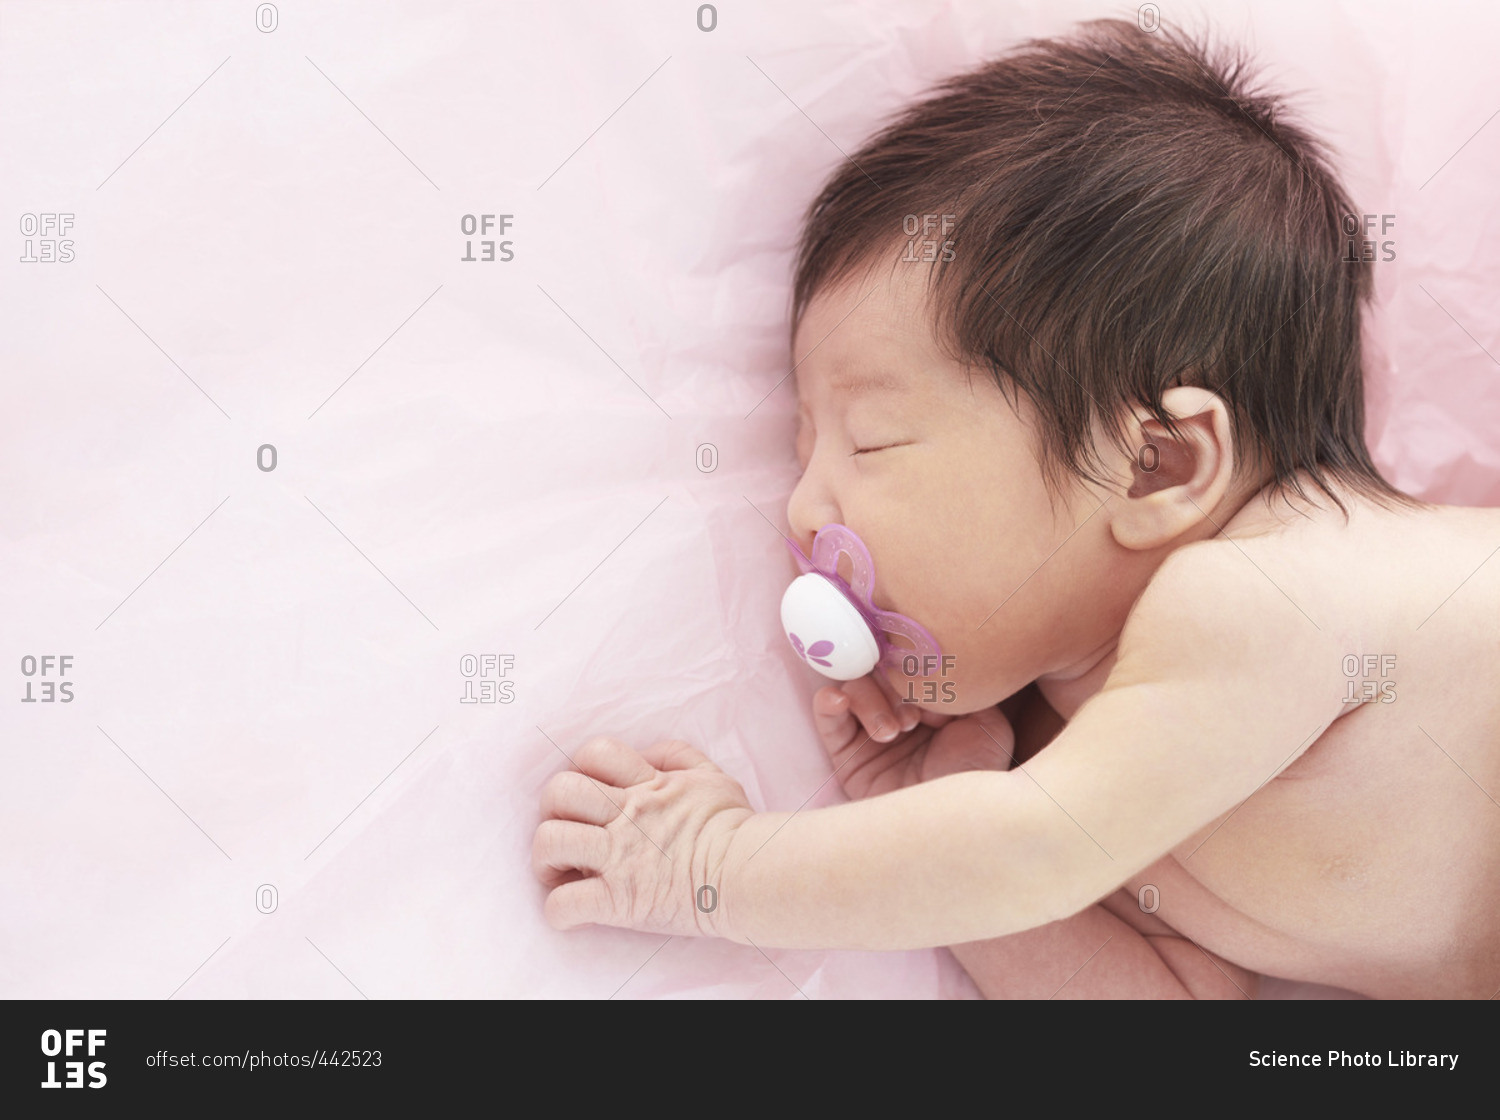 Newborn baby girl with dummy in mouth